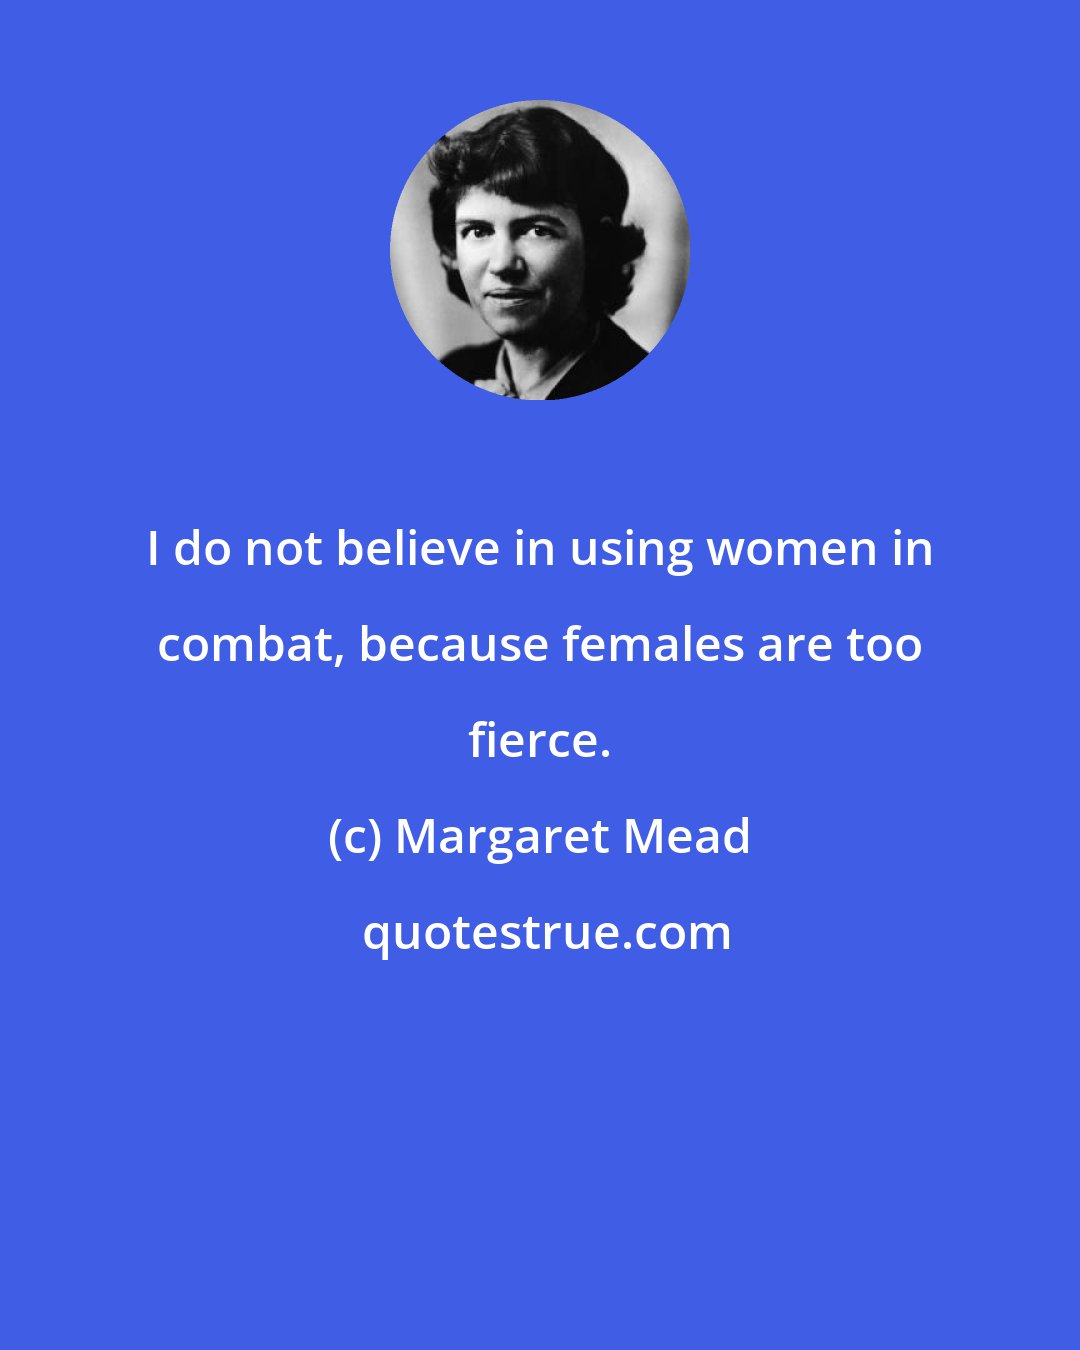 Margaret Mead: I do not believe in using women in combat, because females are too fierce.